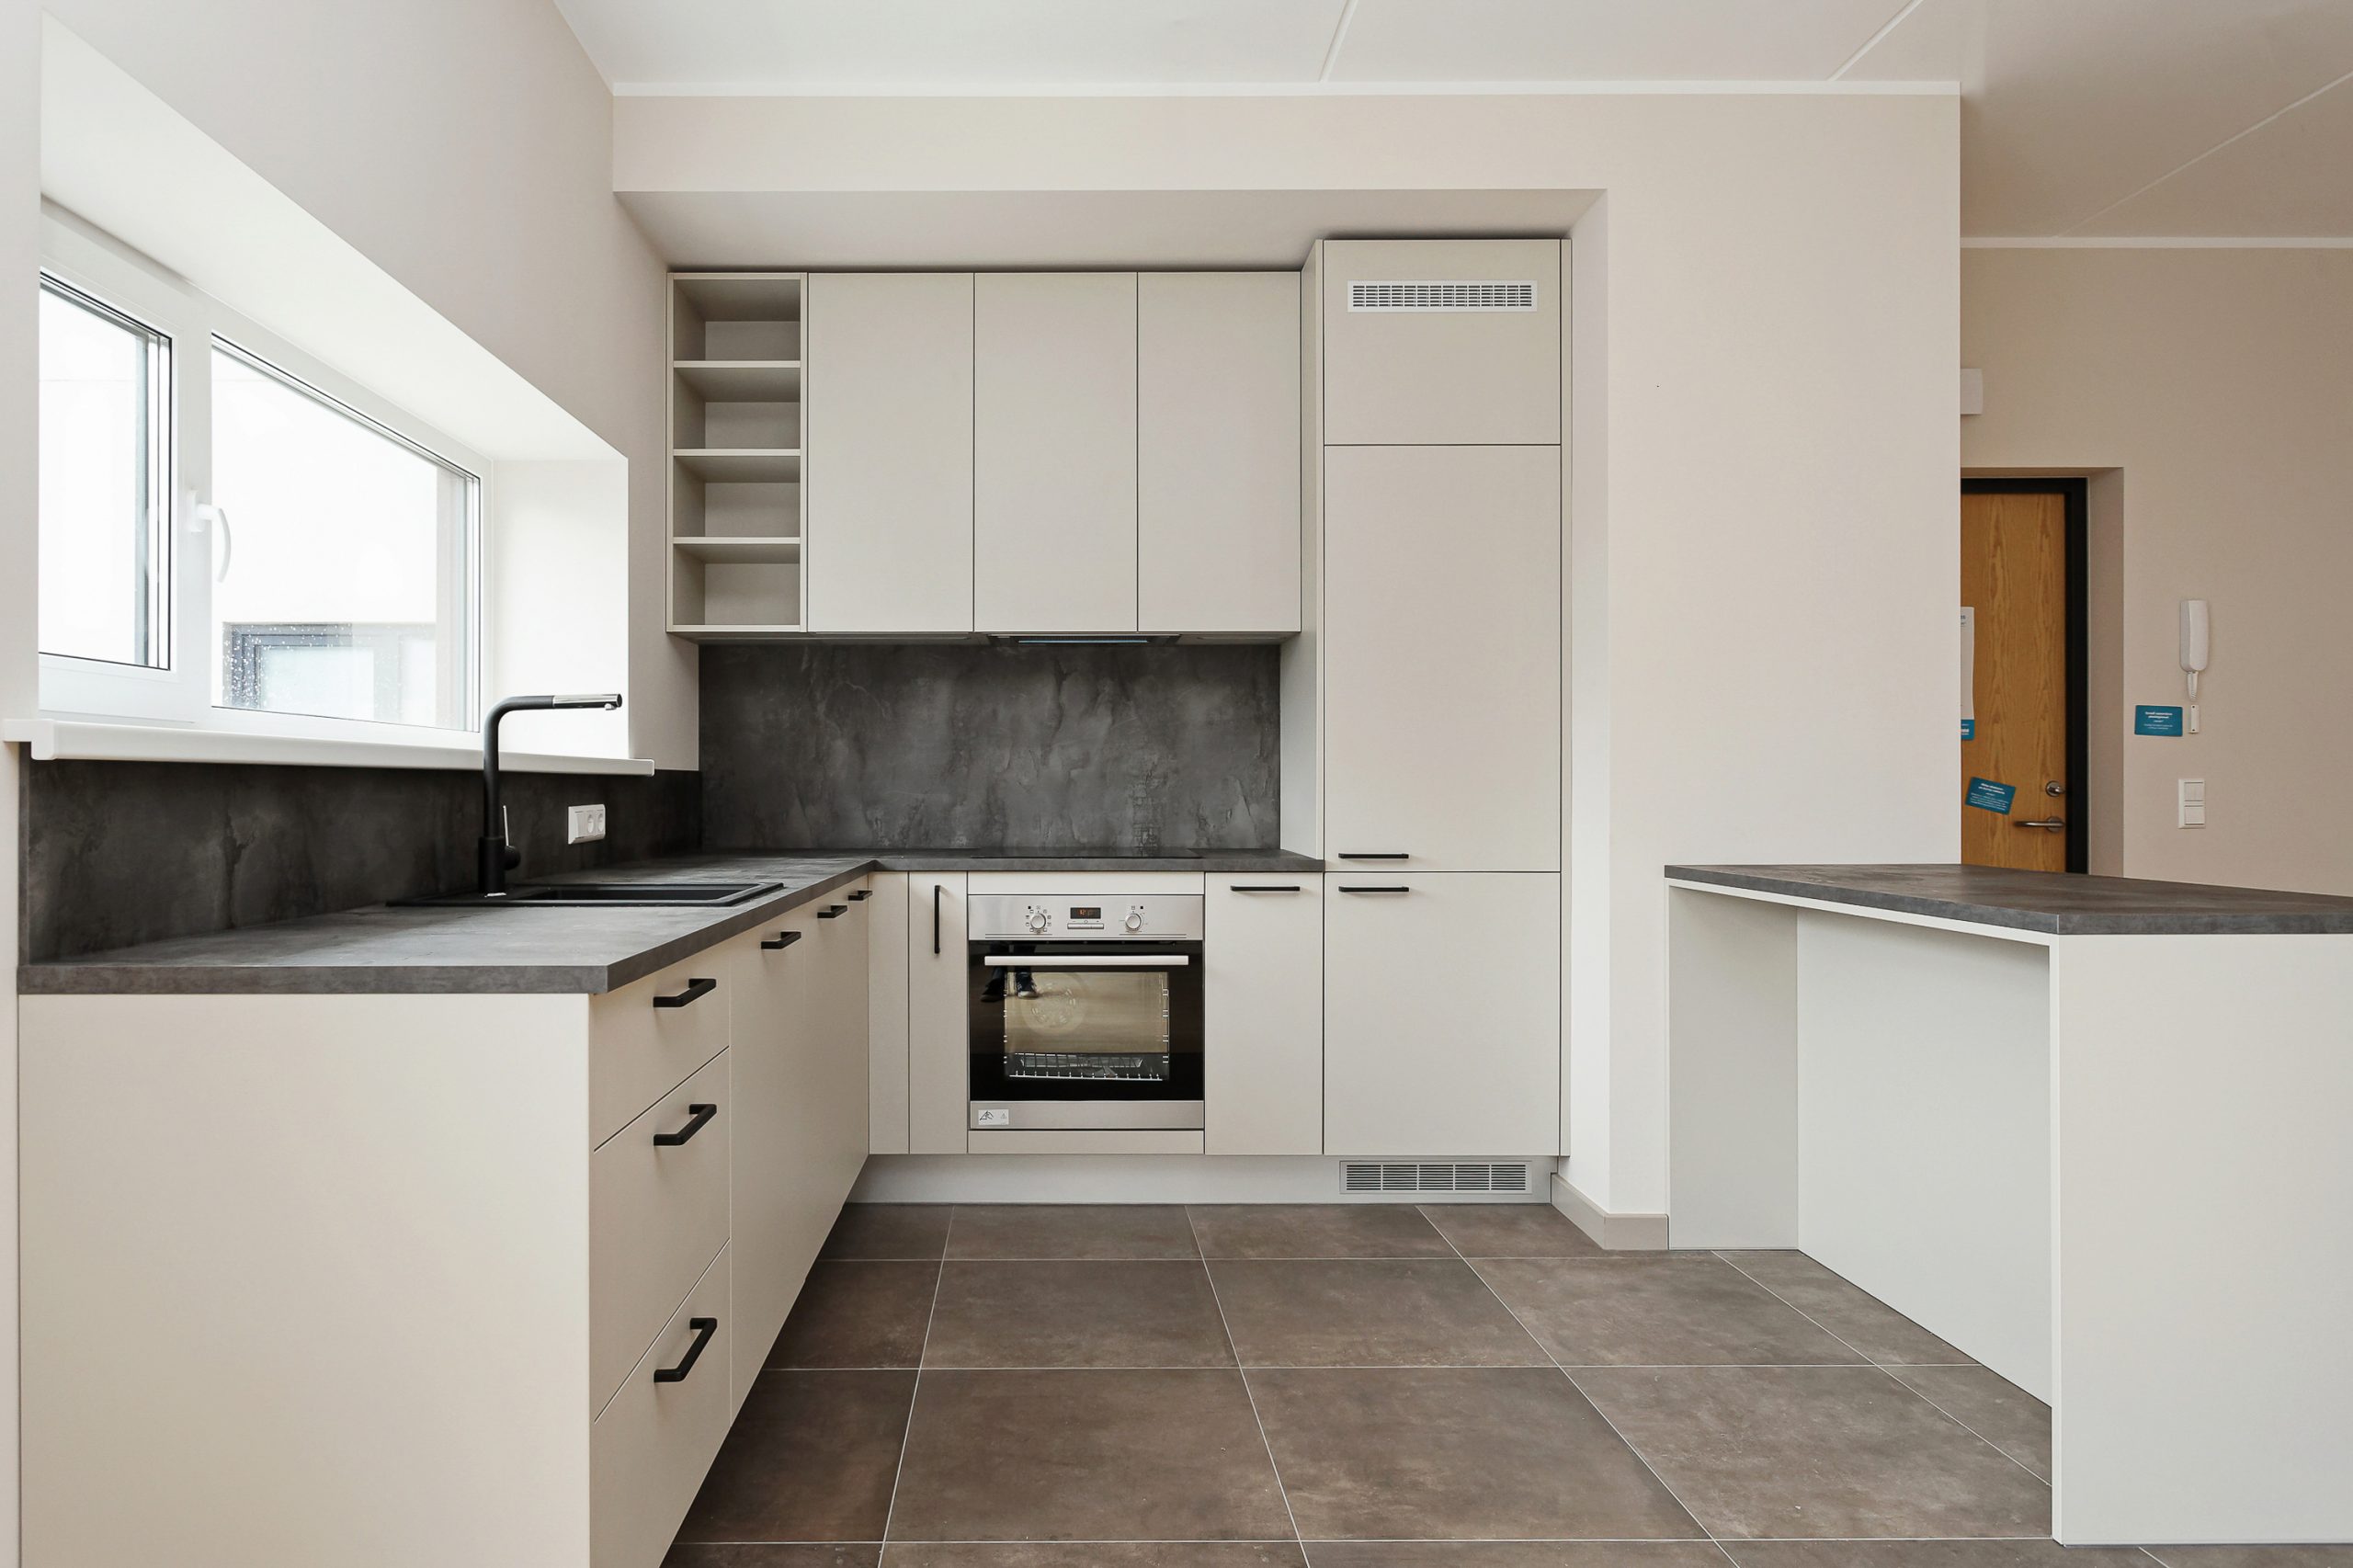 Kitchen in the new Merks project in light colours